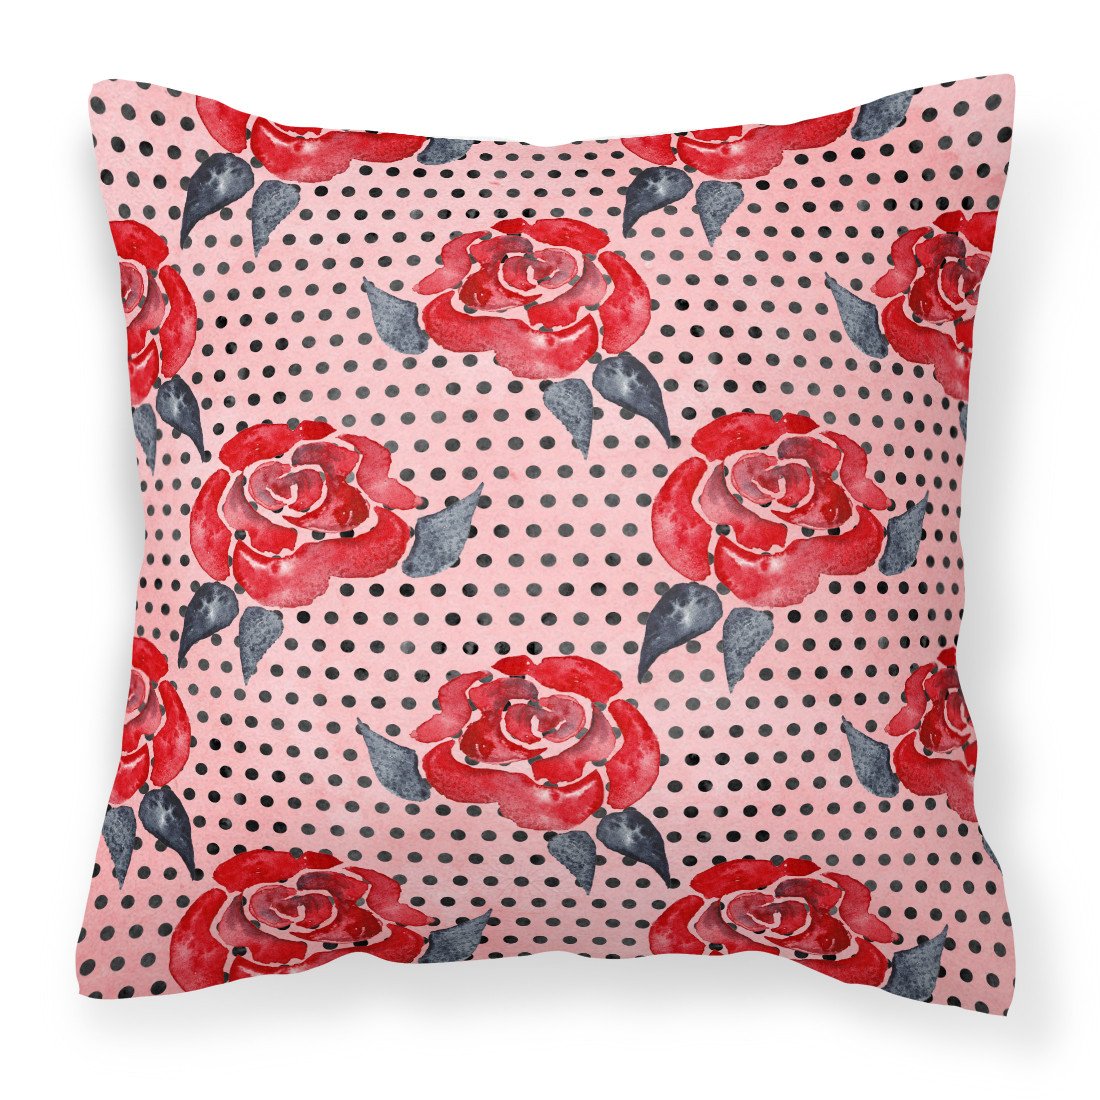 Watercolor Red Roses and Polkadots Fabric Decorative Pillow BB7513PW1818 by Caroline's Treasures